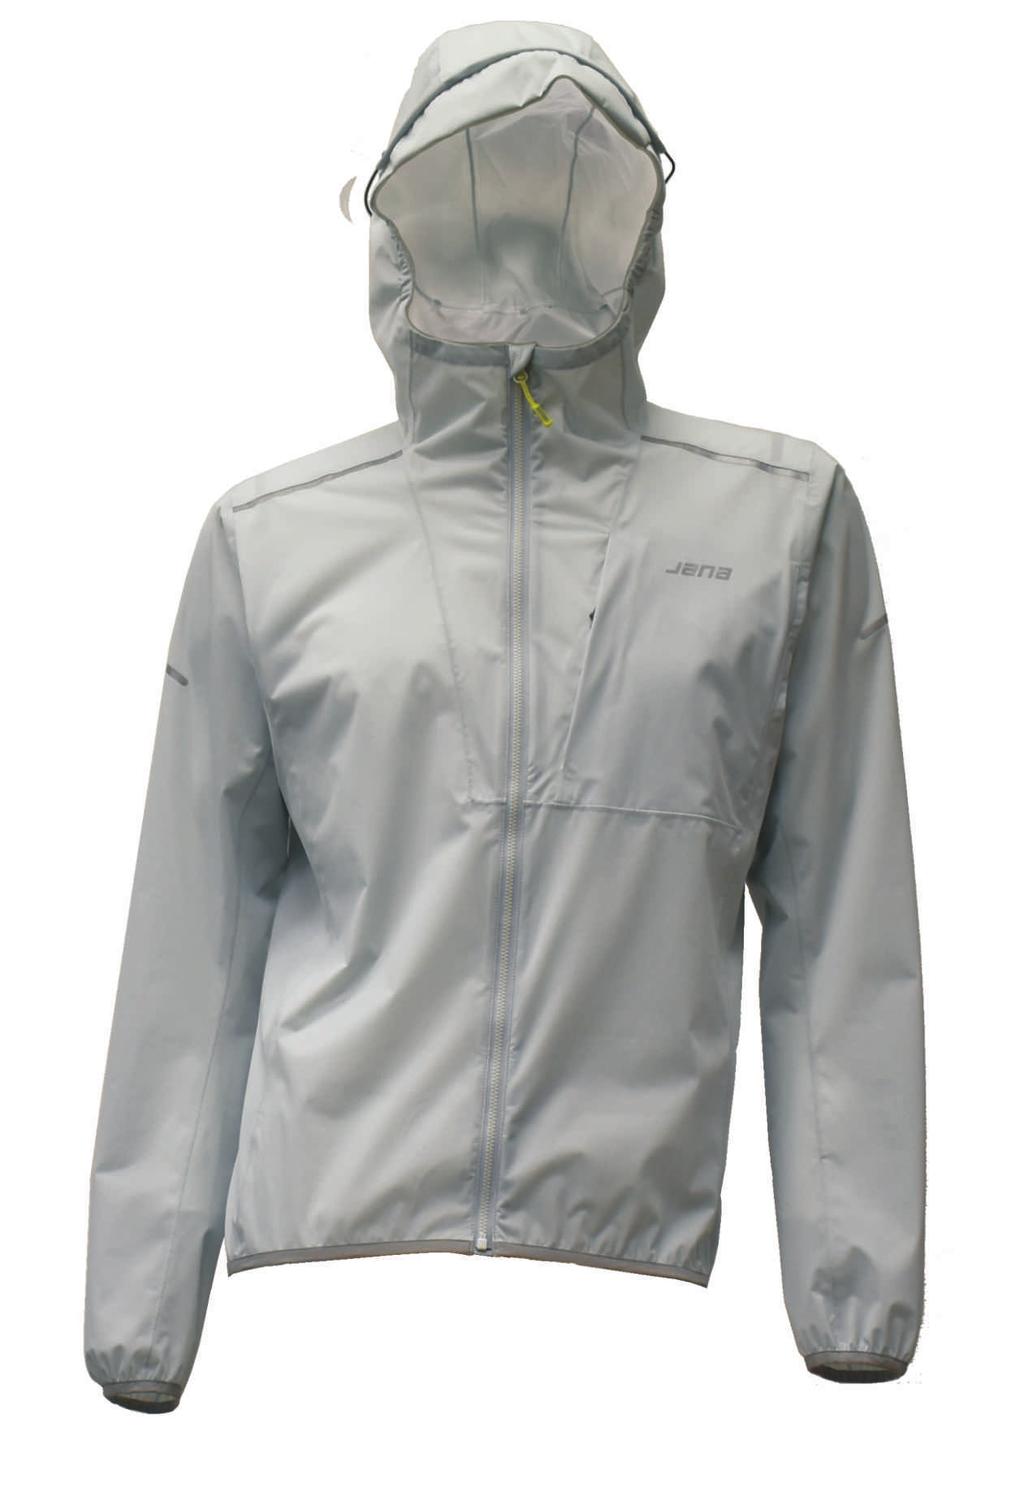 * M's 2L rain jacket made from ultra-light stretchy fabric with luminous membrane * Minimal cutting lines give a clean look * Using YKK #3 LUMIFINE zipper at center front to work